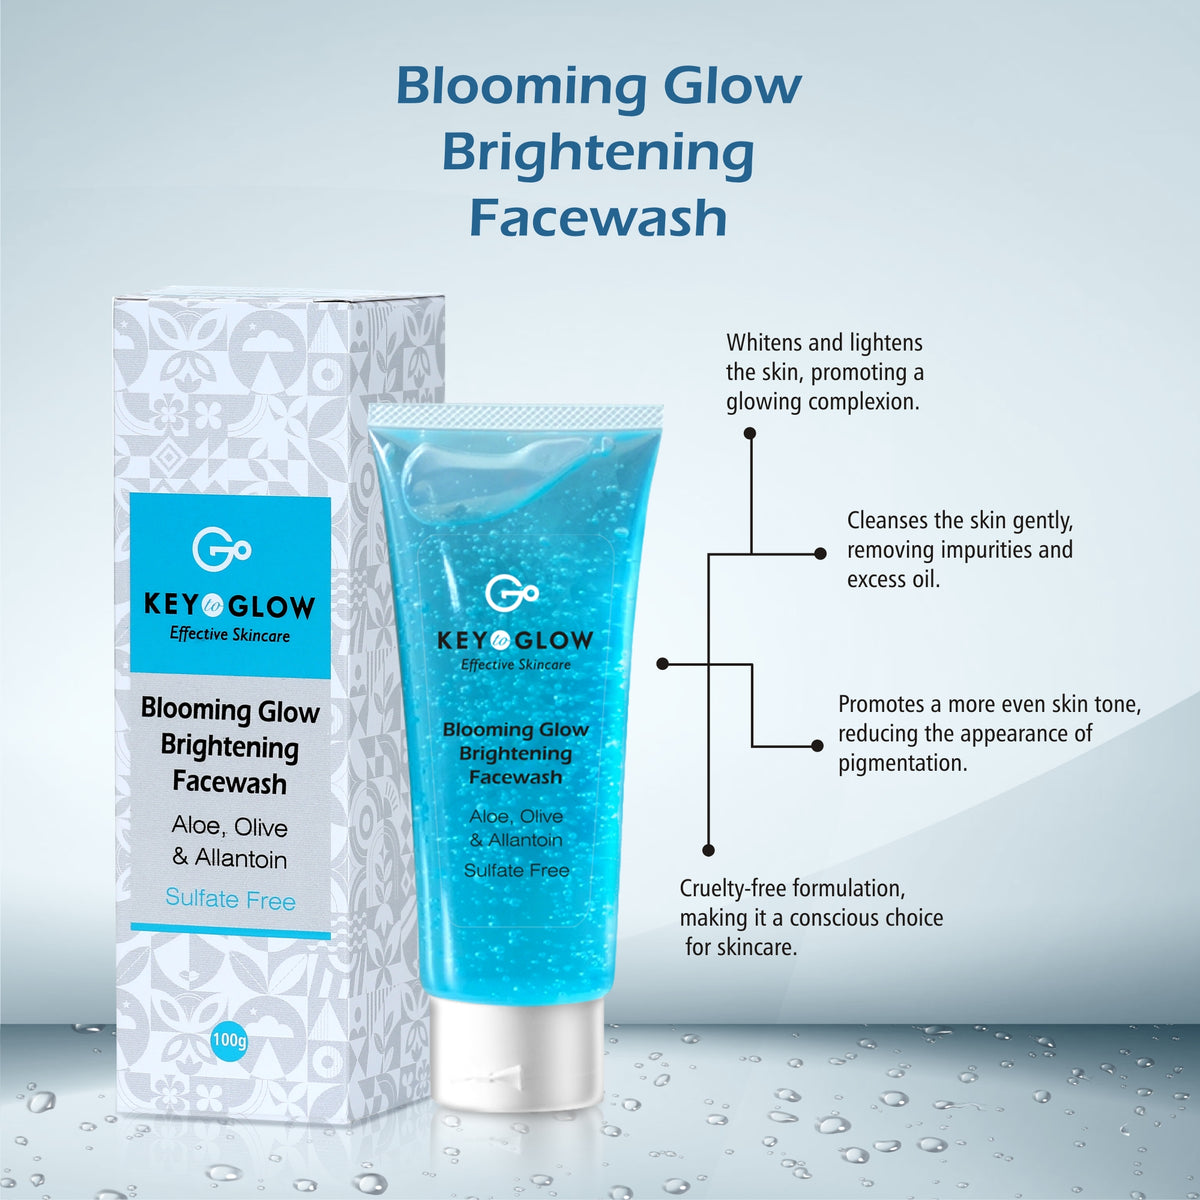 Blooming Glow Brightening Facewash Aloe + Olive + Allantoin Sulfate Free - 100g - Key to Glow 